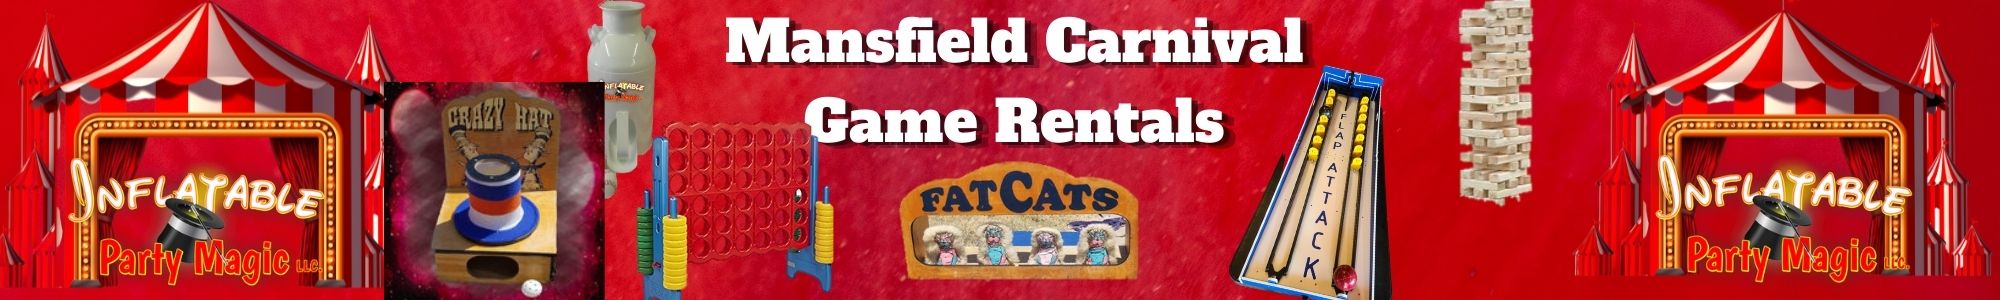 Mansfield Carnival Game and Giant Backyard Game Rentals